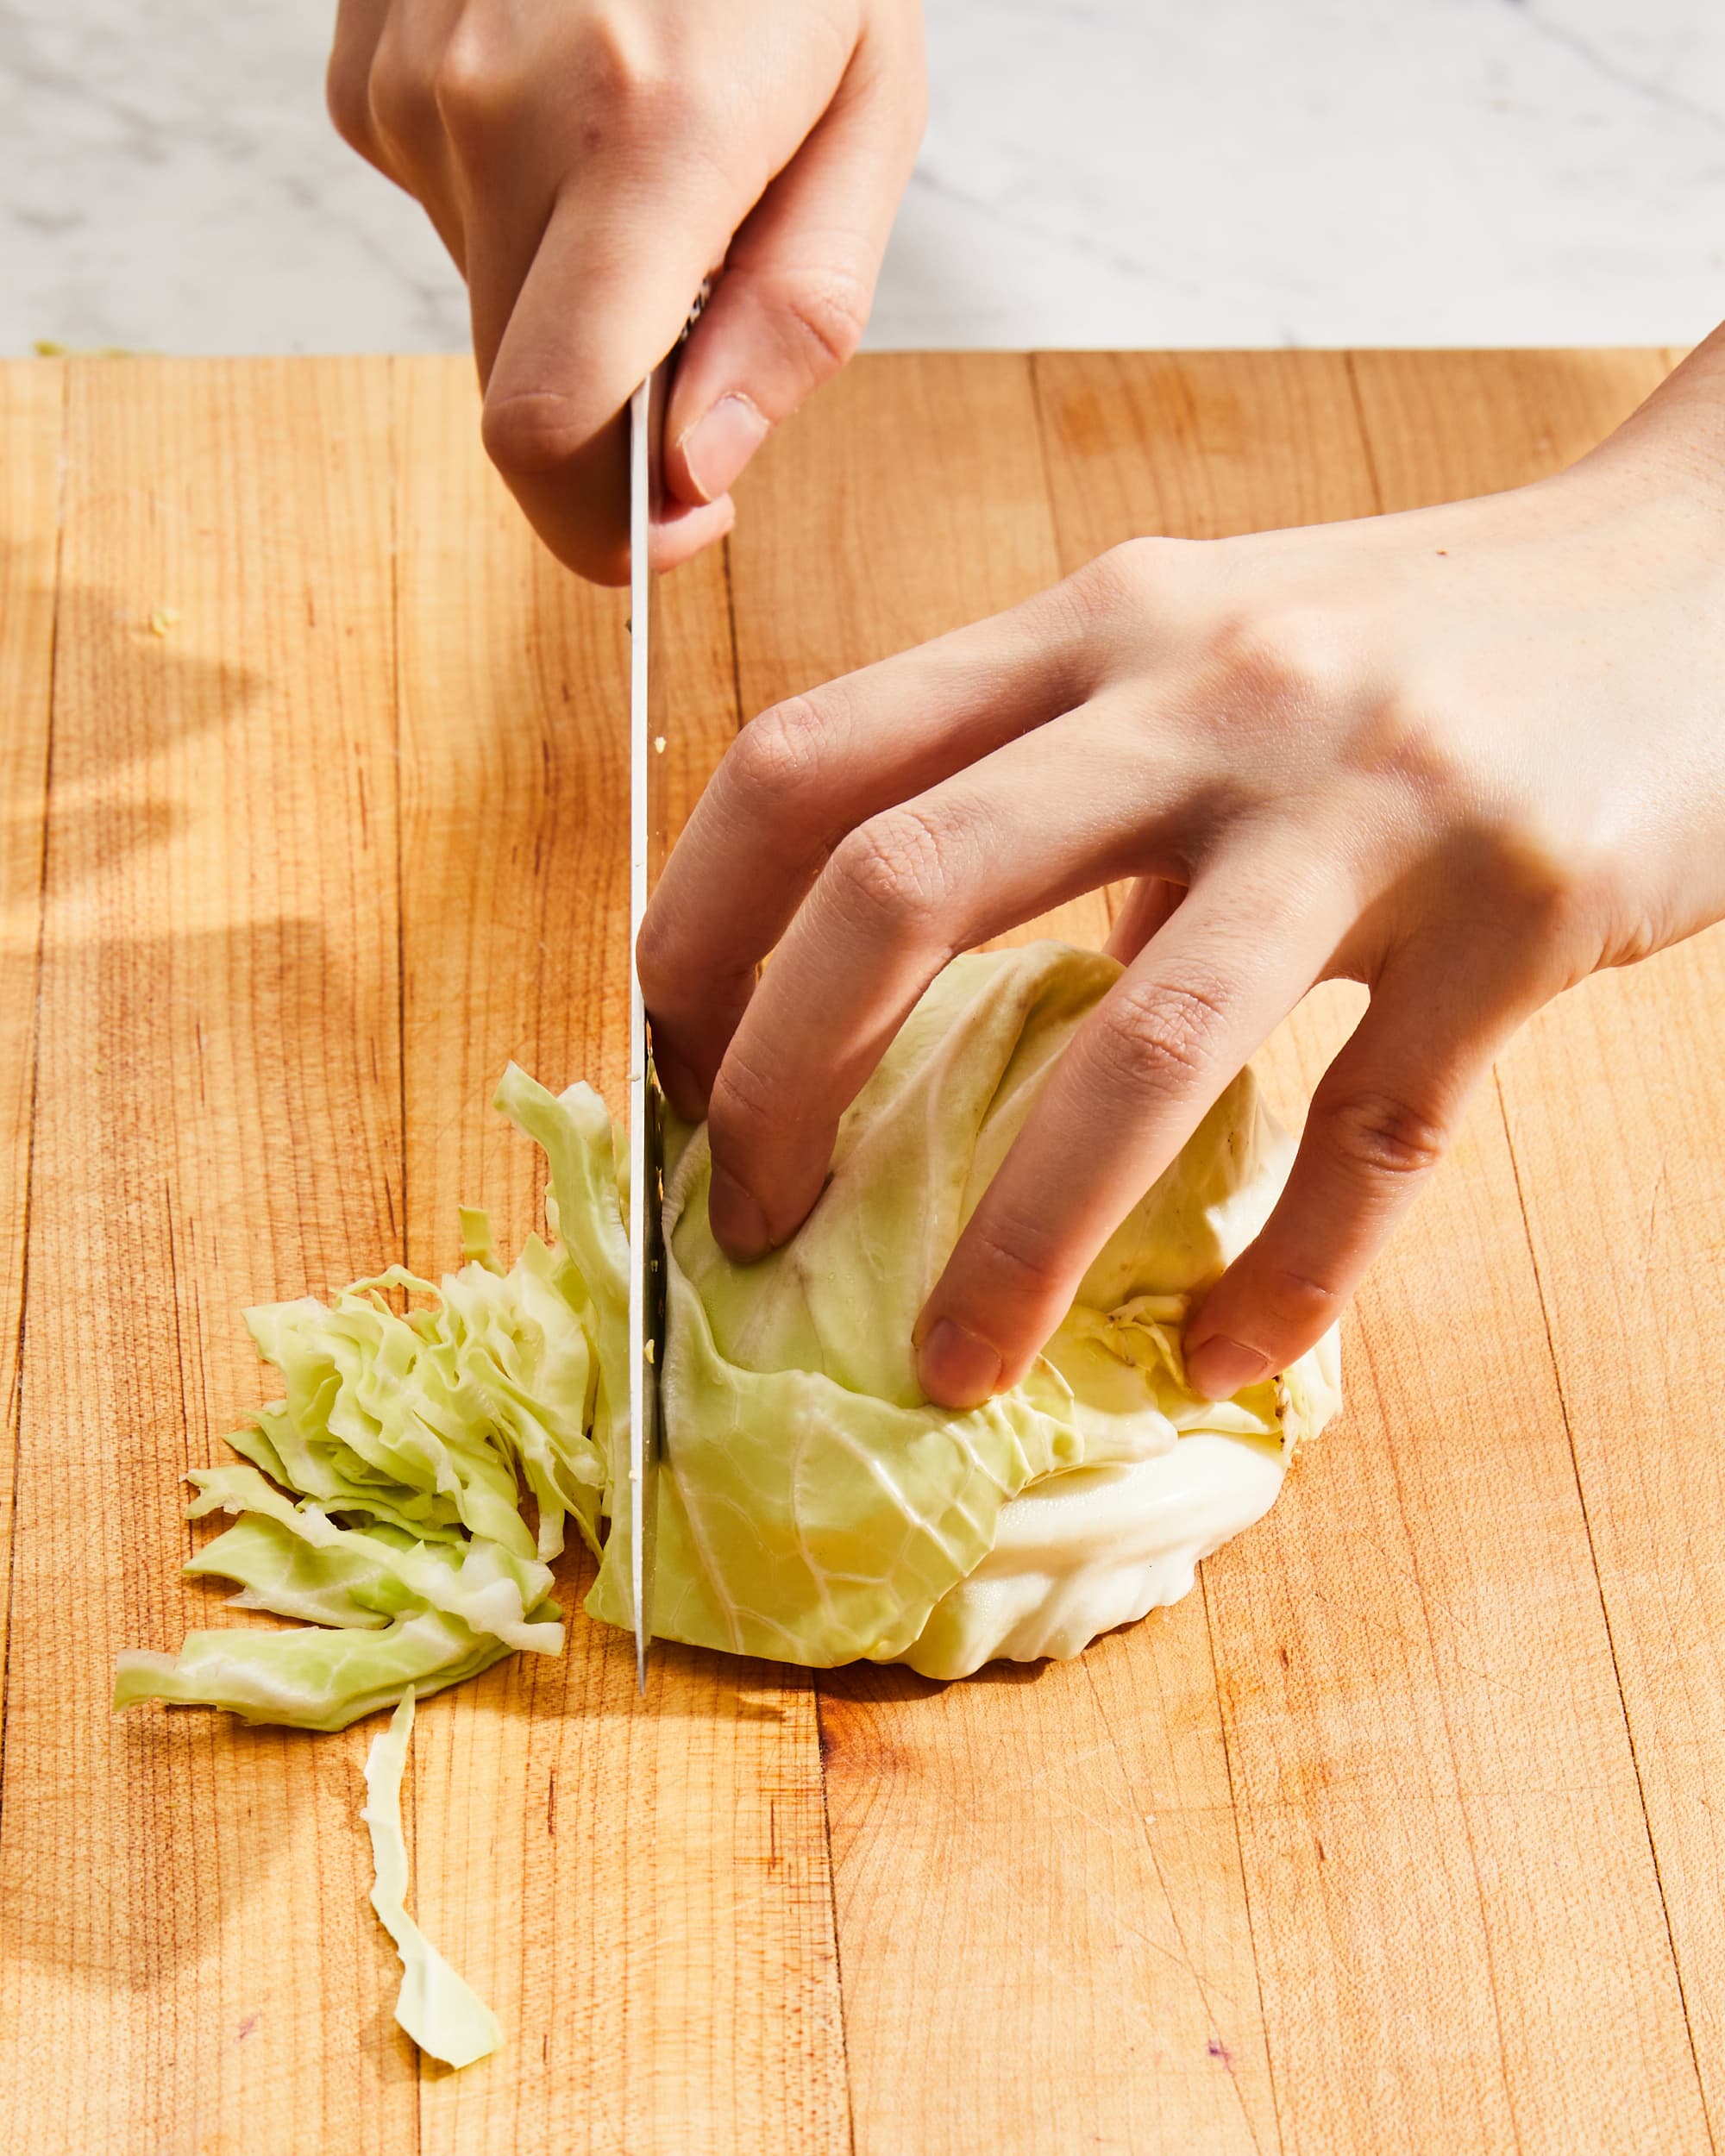 https://cdn.apartmenttherapy.info/image/upload/v1671732525/k/Photo/Tips/2023-02-How-to-Cut-Cabbage/How-to-cut-cabbage-240.jpg